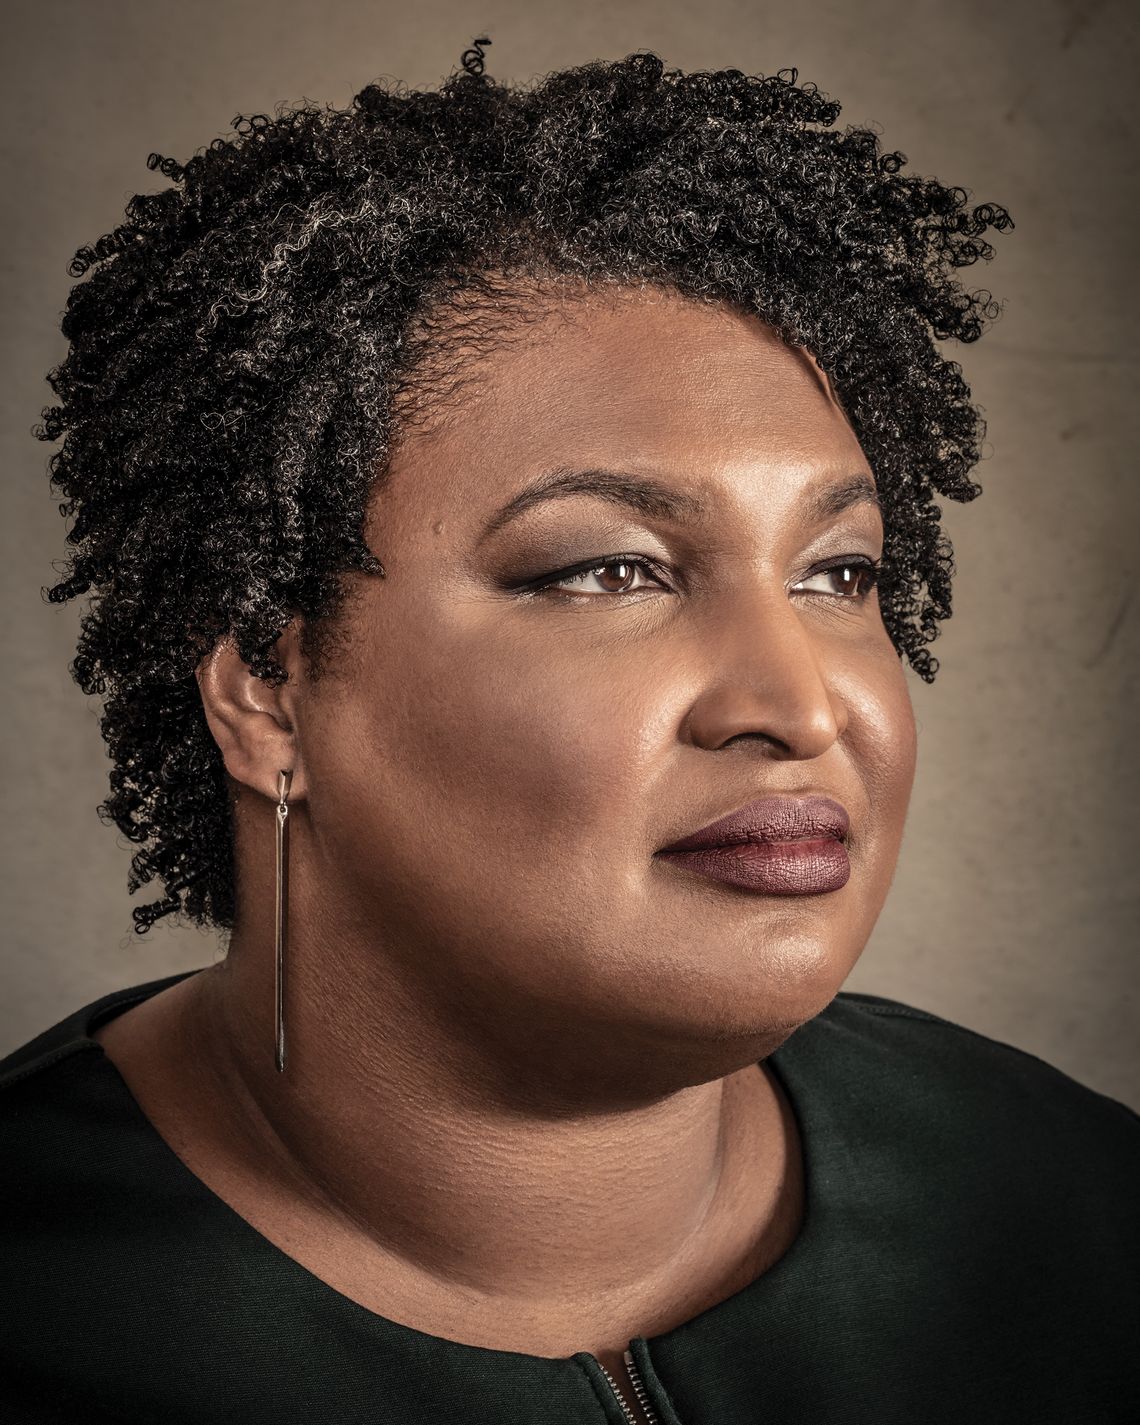 Whats Next for Stacey Abrams?